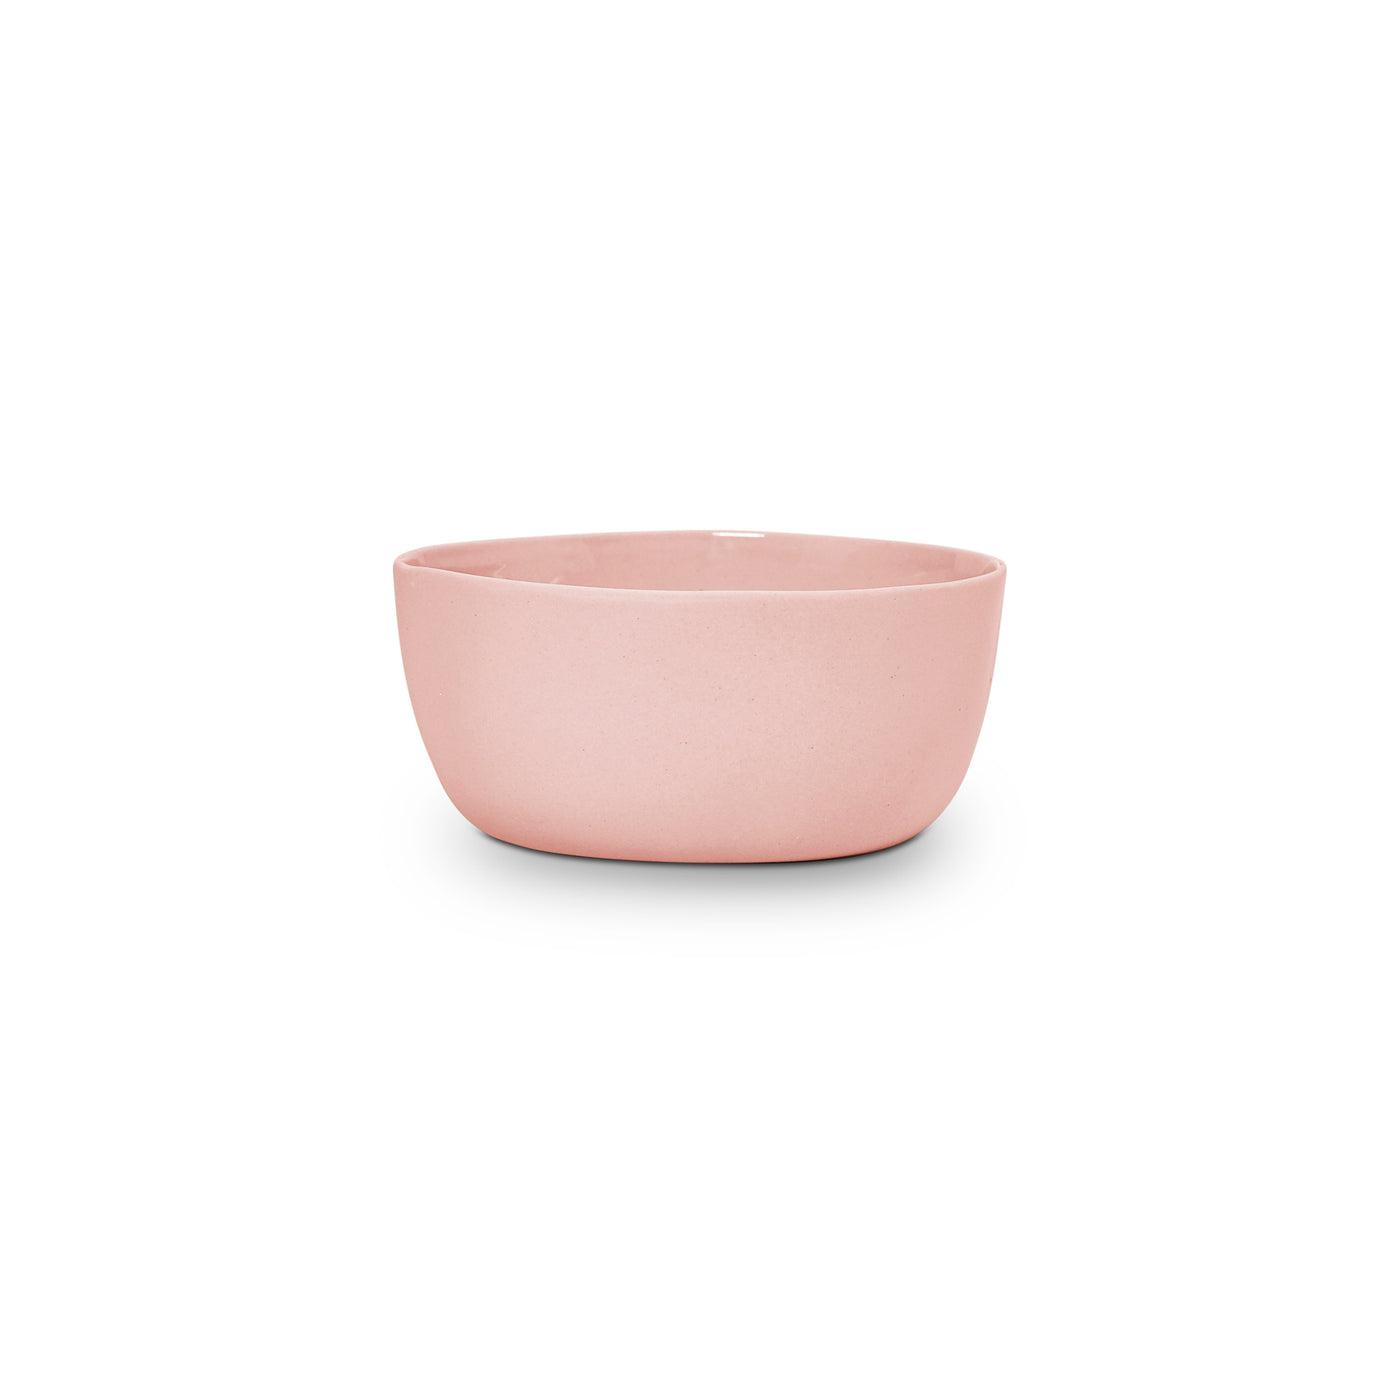 Cloud Bowl Icy Pink (SS)